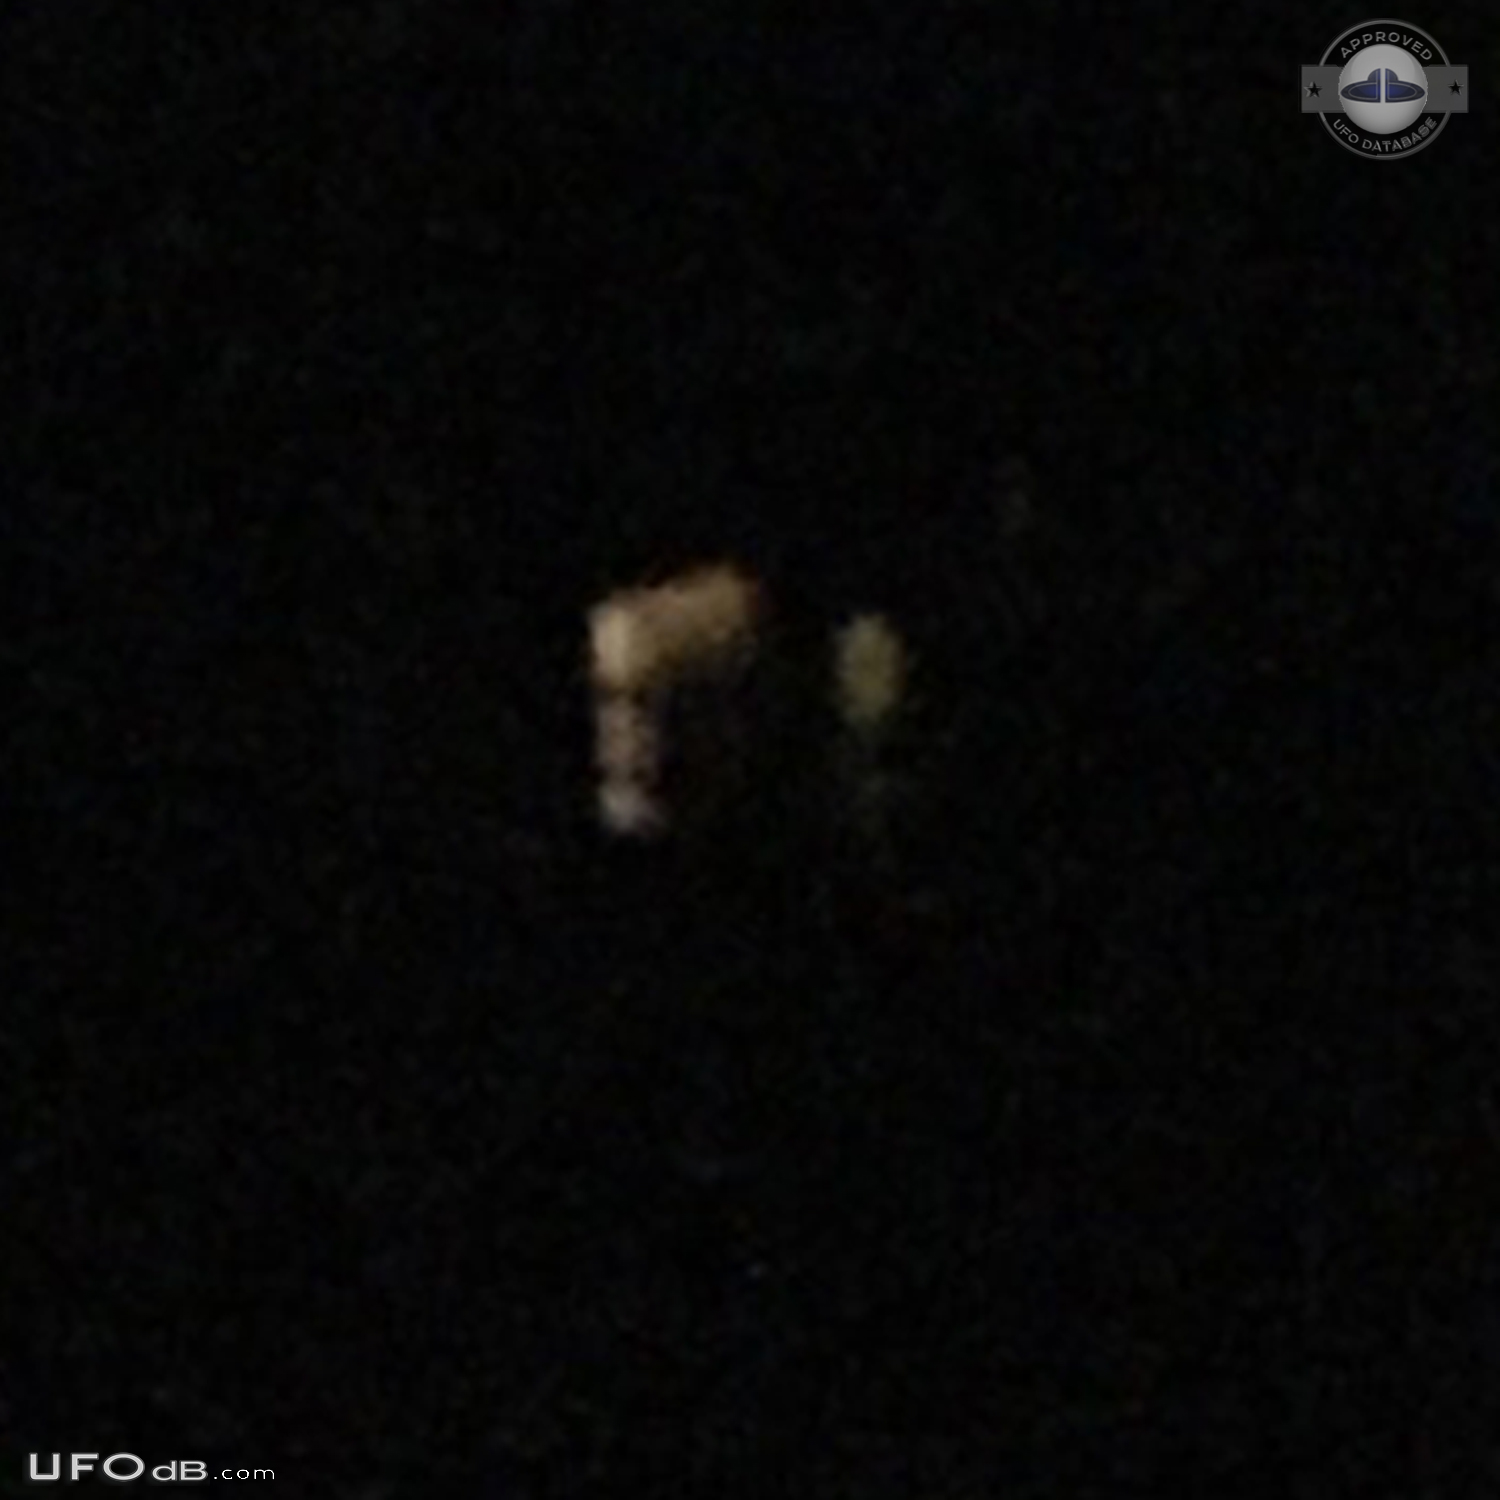 Wife see strange looking UFO and take picture - Pawling New York USA 2 UFO Picture #785-4